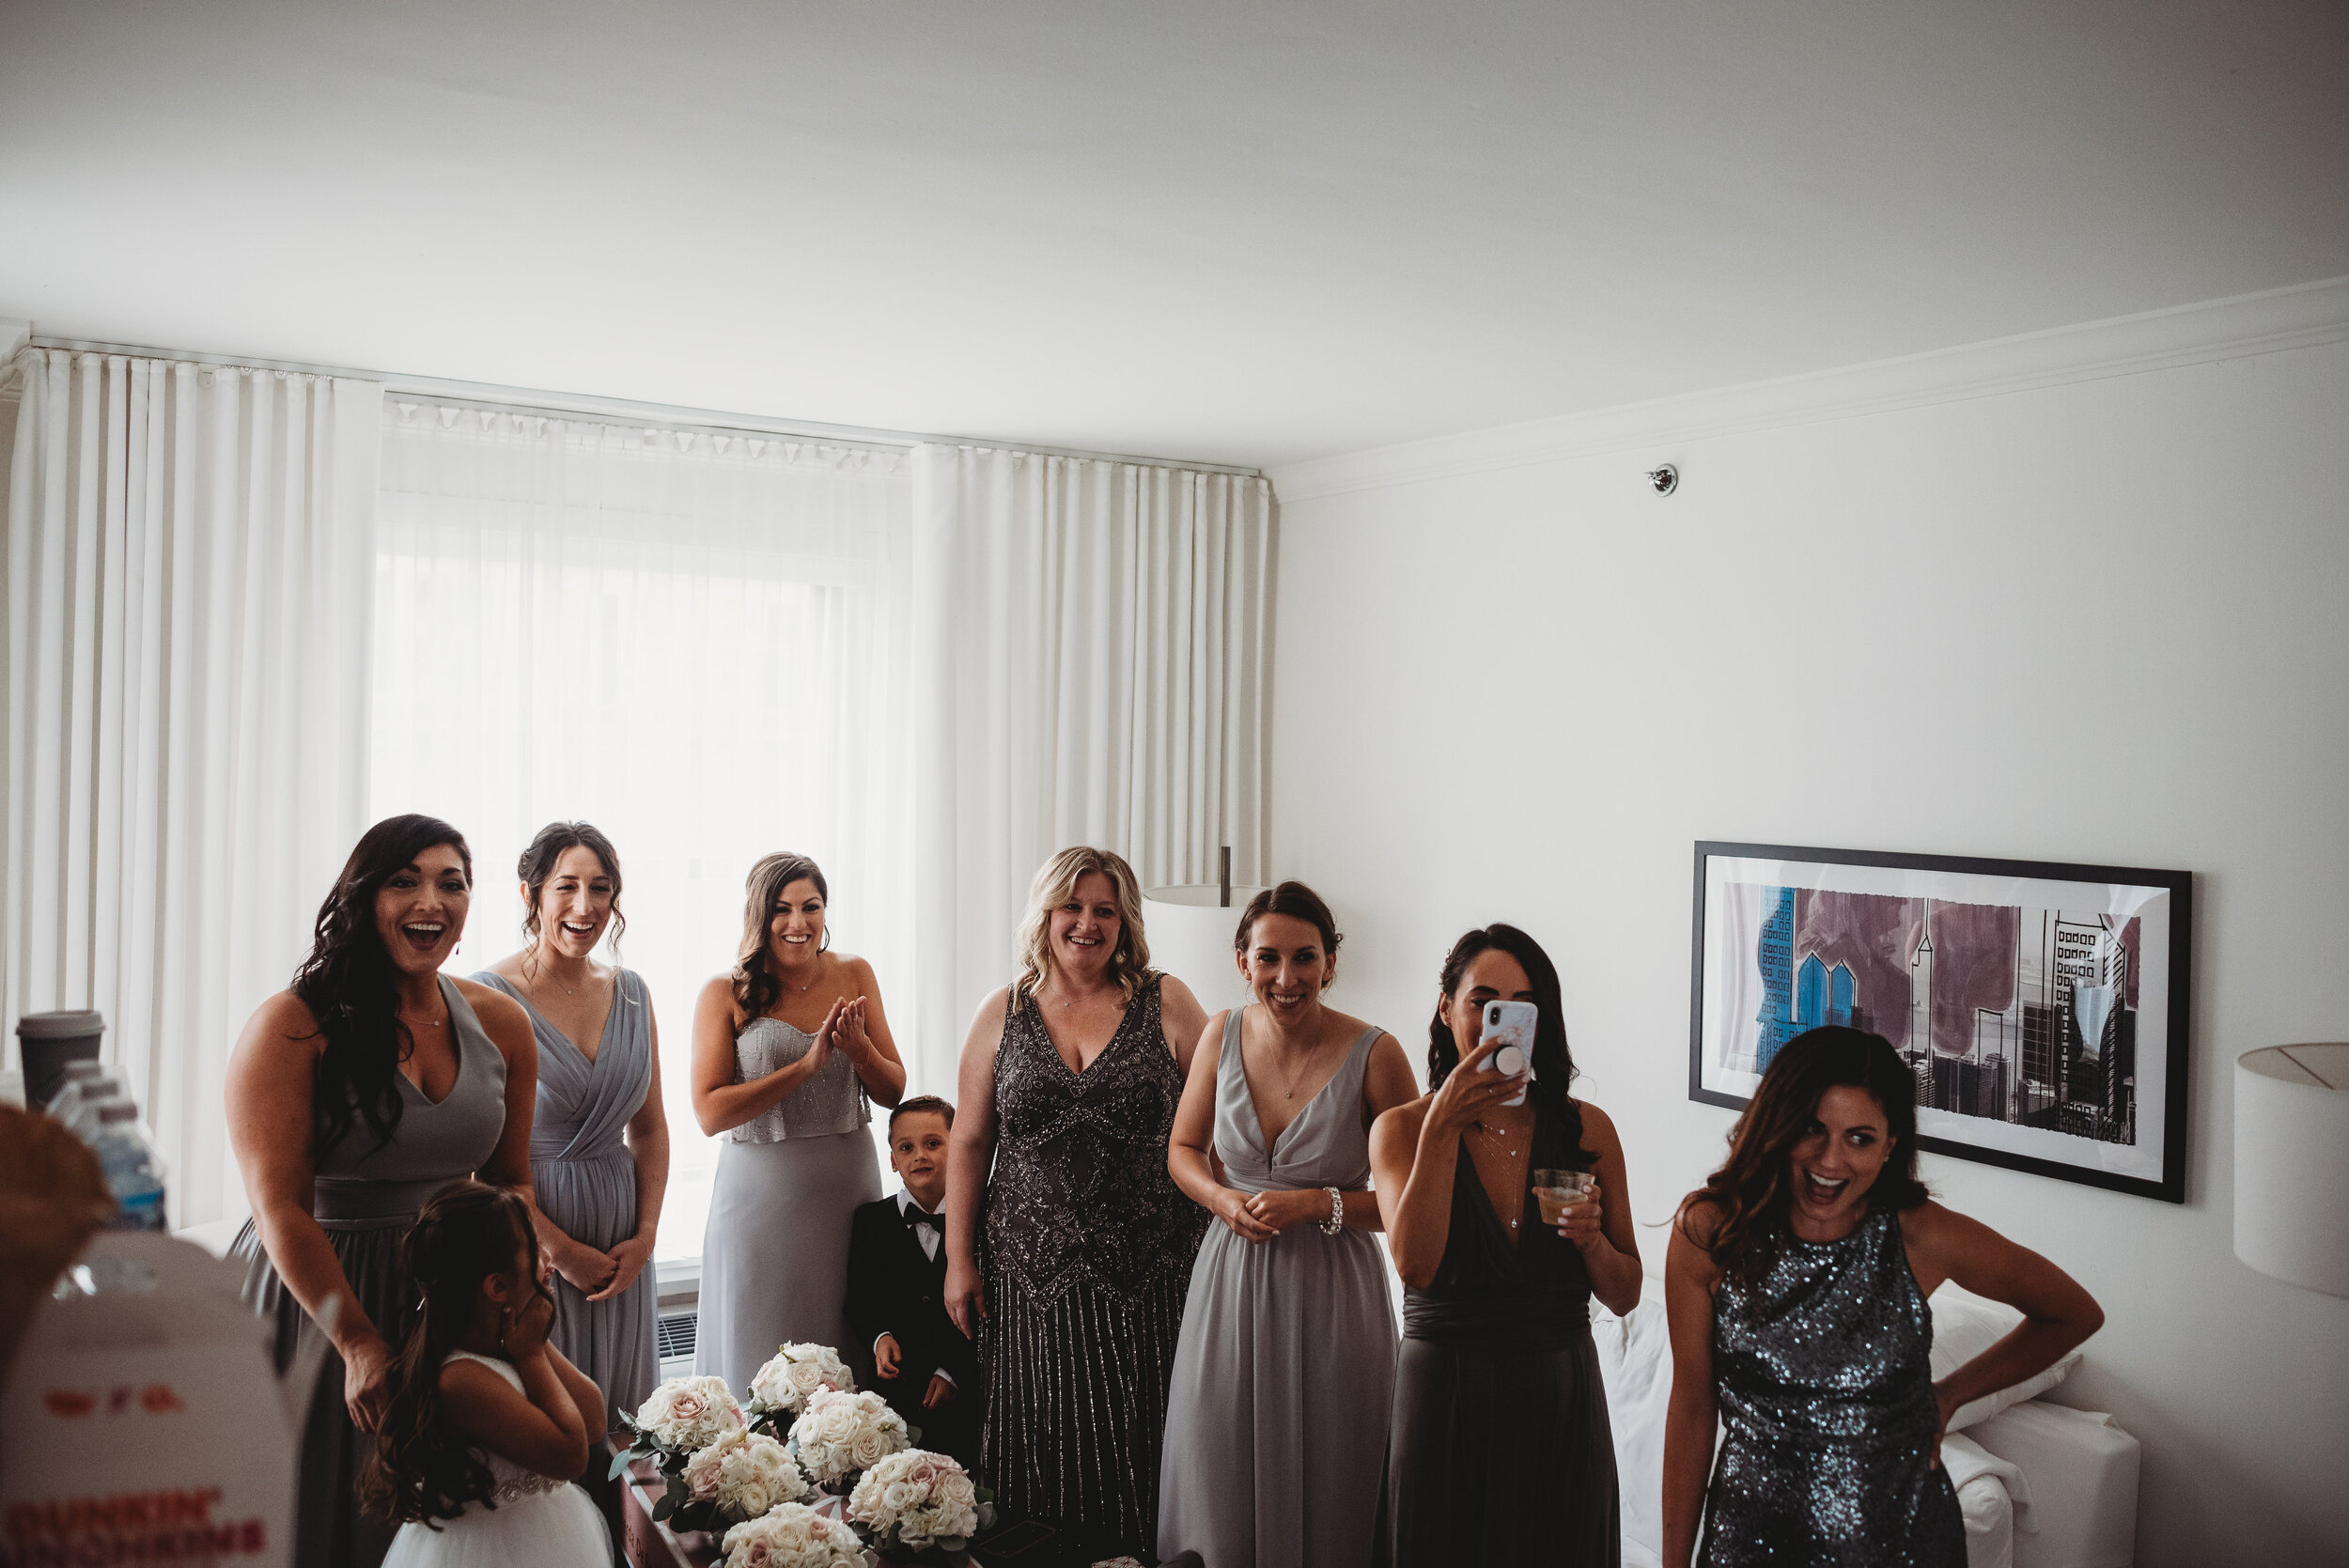 Bridesmaids reaction to wedding dress: Modern Chic Chicago History Museum Wedding captured by Girl with the Tattoos. See more wedding ideas at CHItheeWED.com!